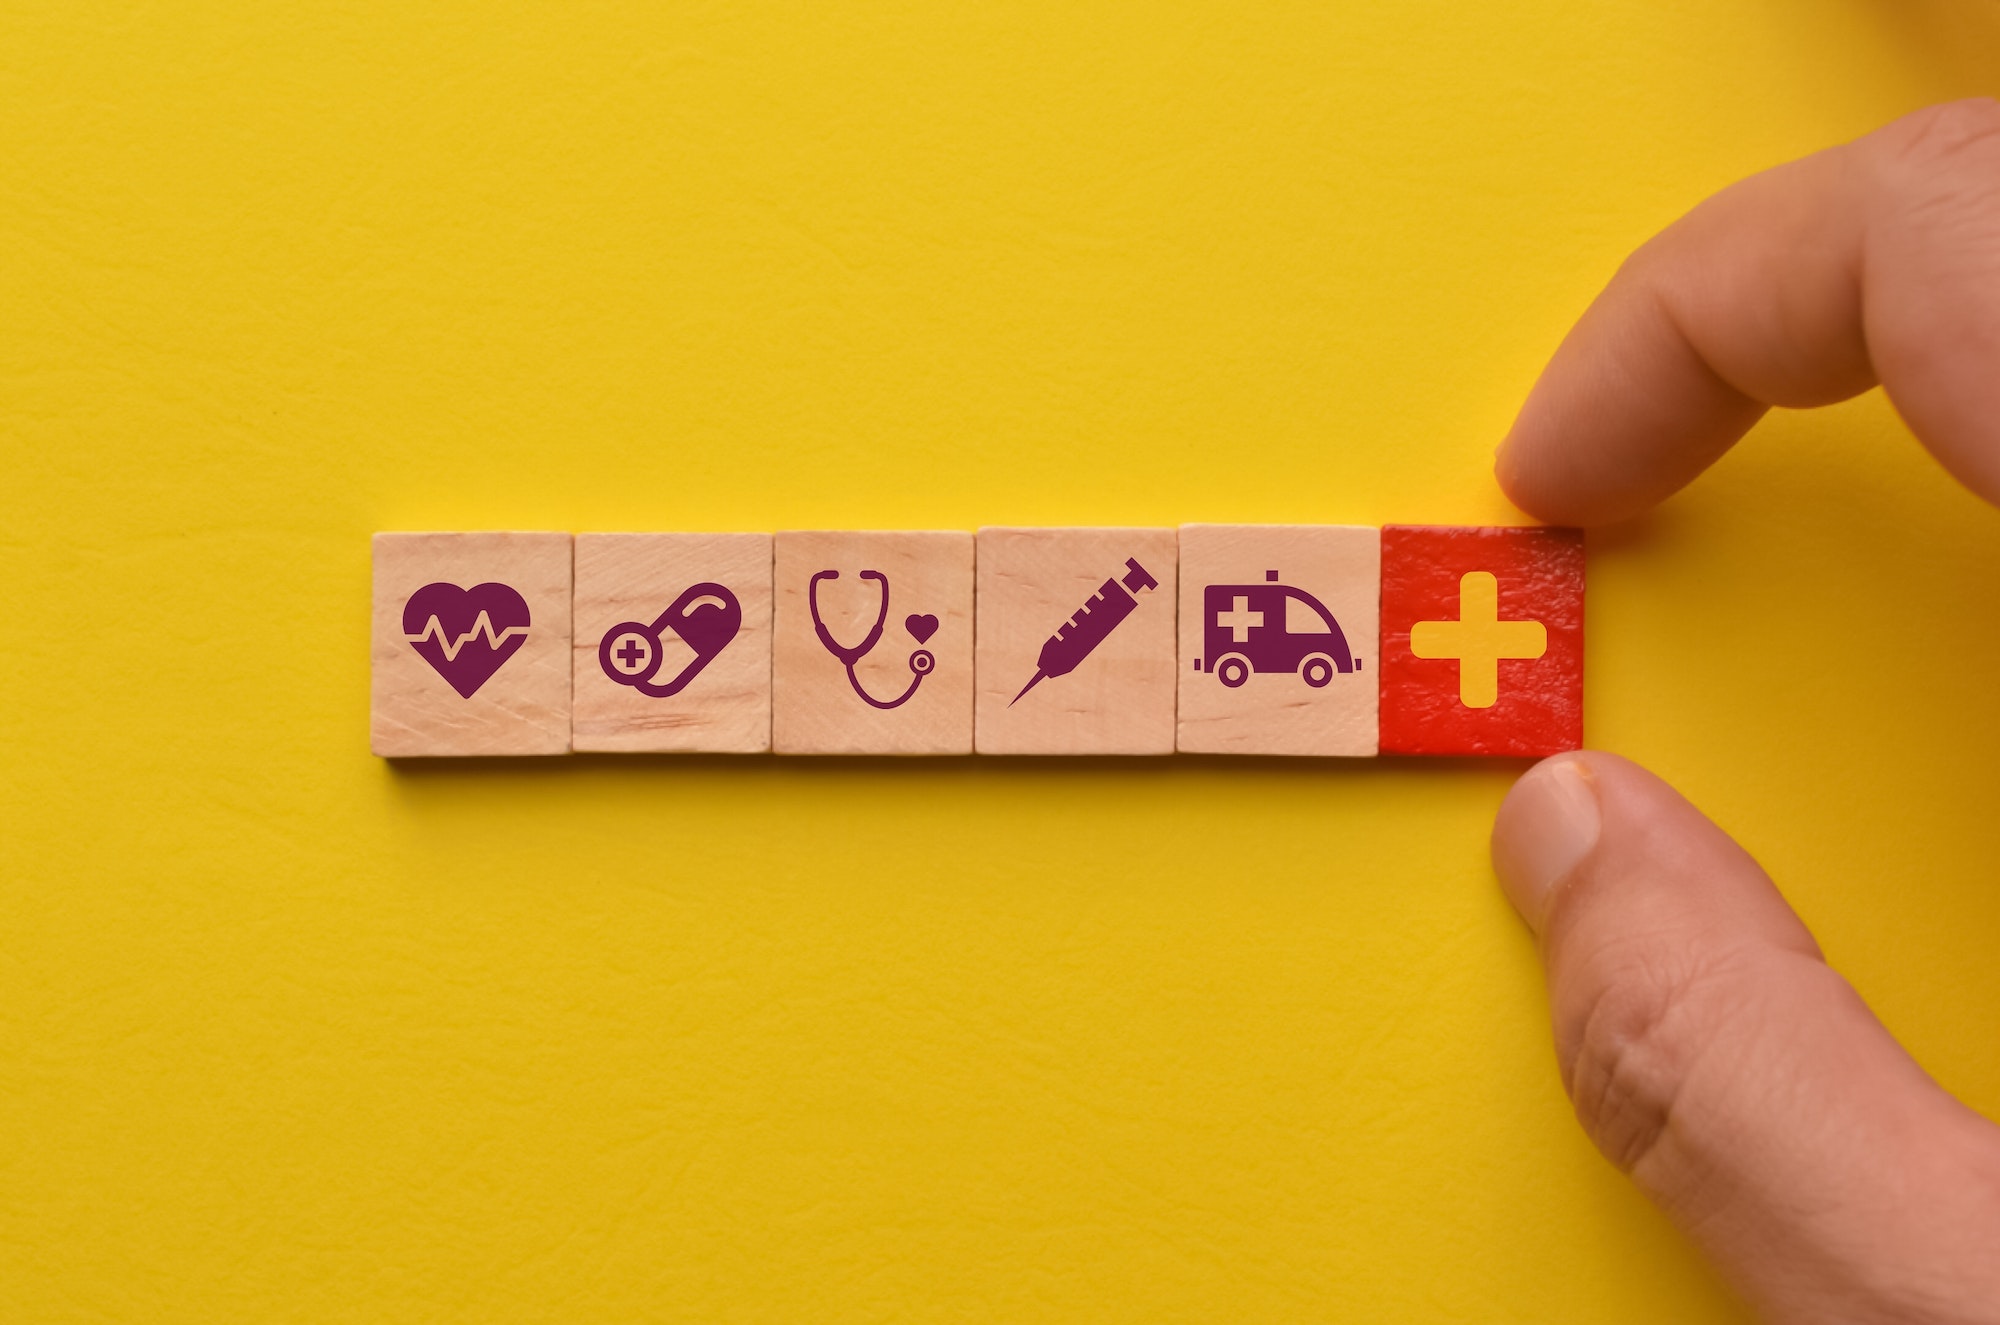 Conceptual of healthcare. Wooden cube blocks with healthcare icons.